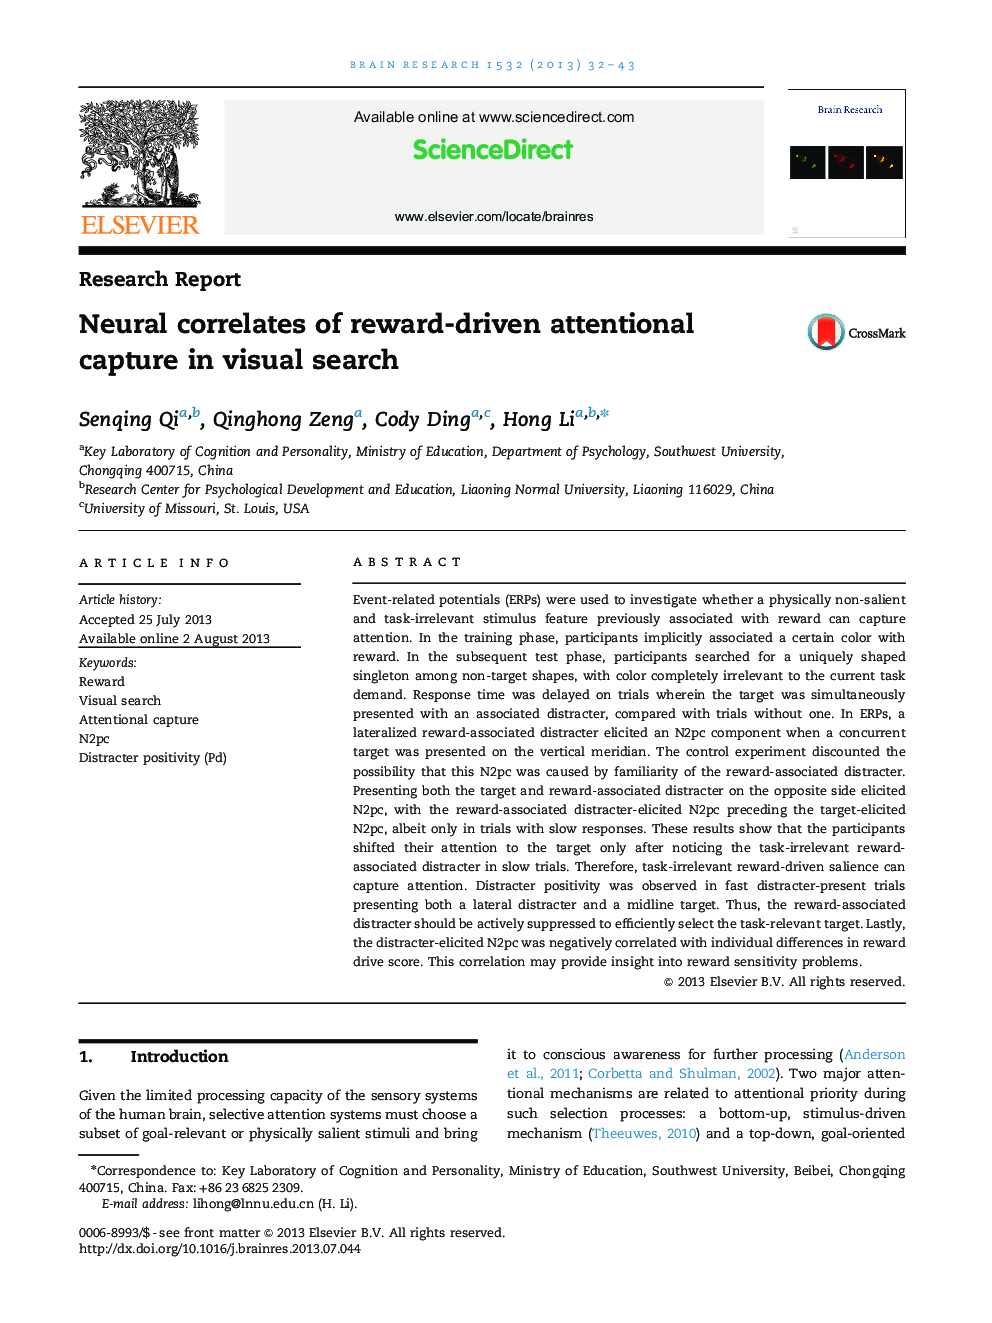 Research ReportNeural correlates of reward-driven attentional capture in visual search